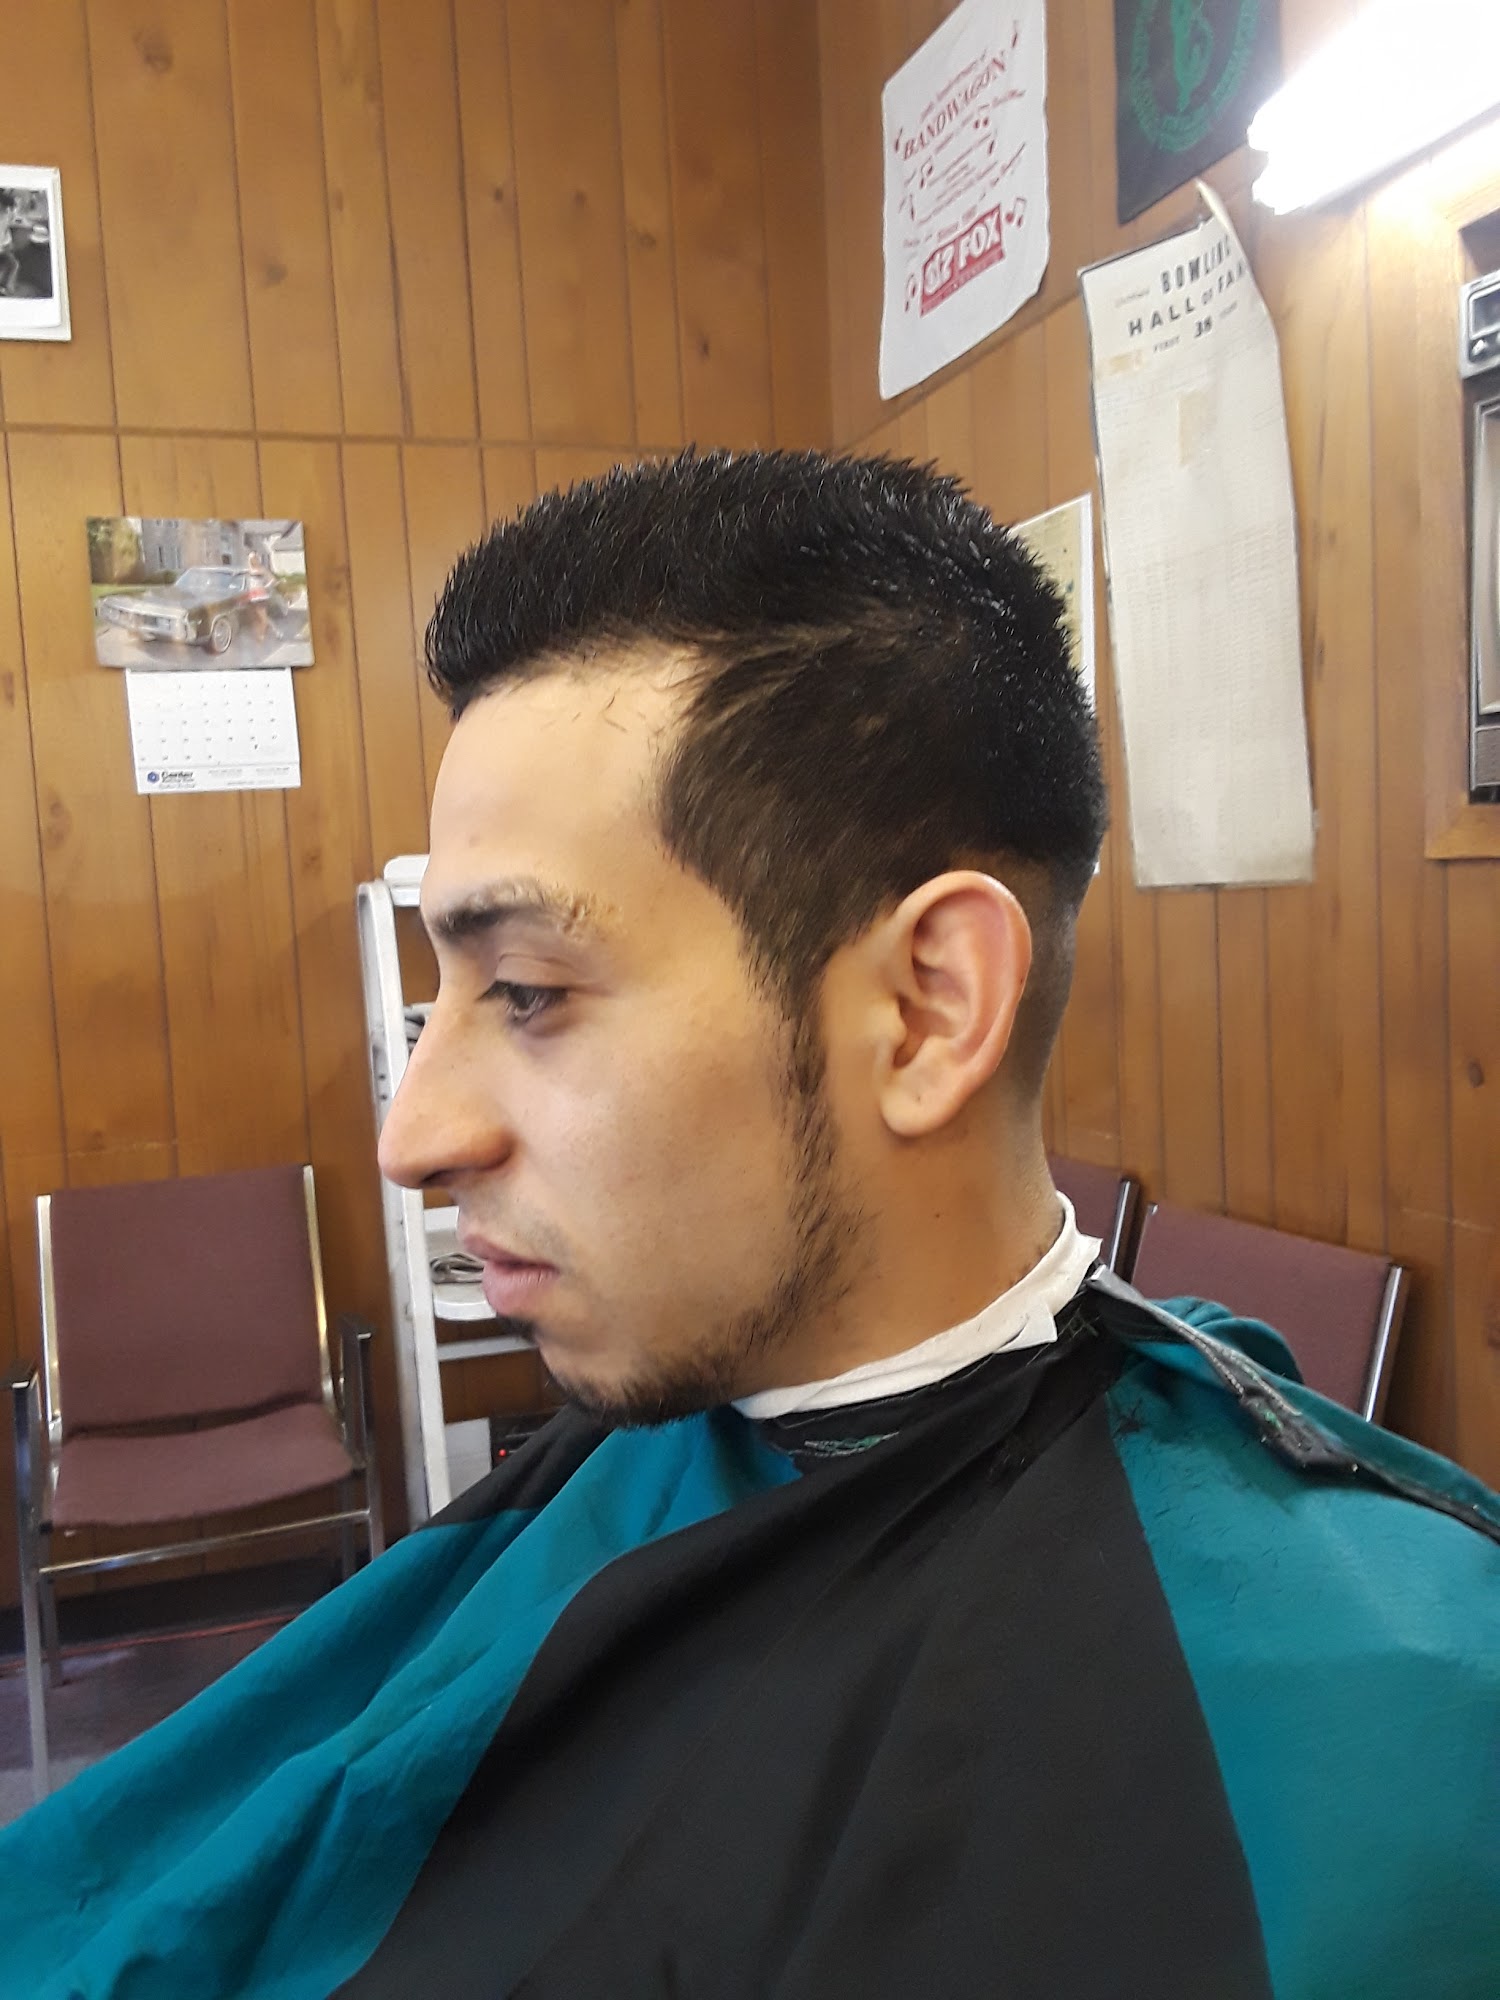 Larry's Barber & Style 213 N Sibley Ave #1, Litchfield Minnesota 55355